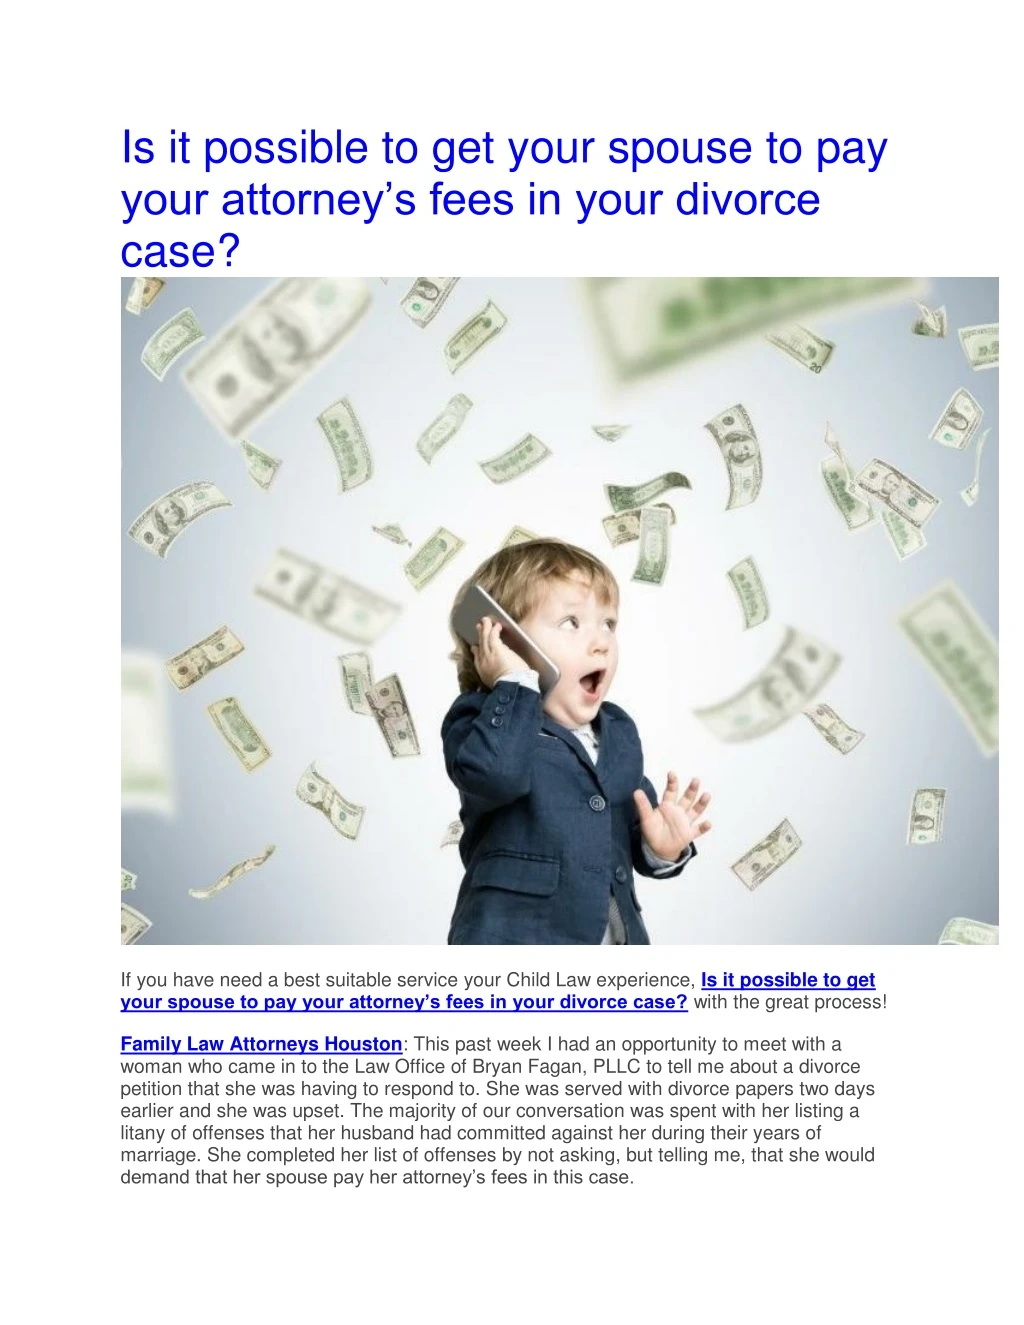 is it possible to get your spouse to pay your